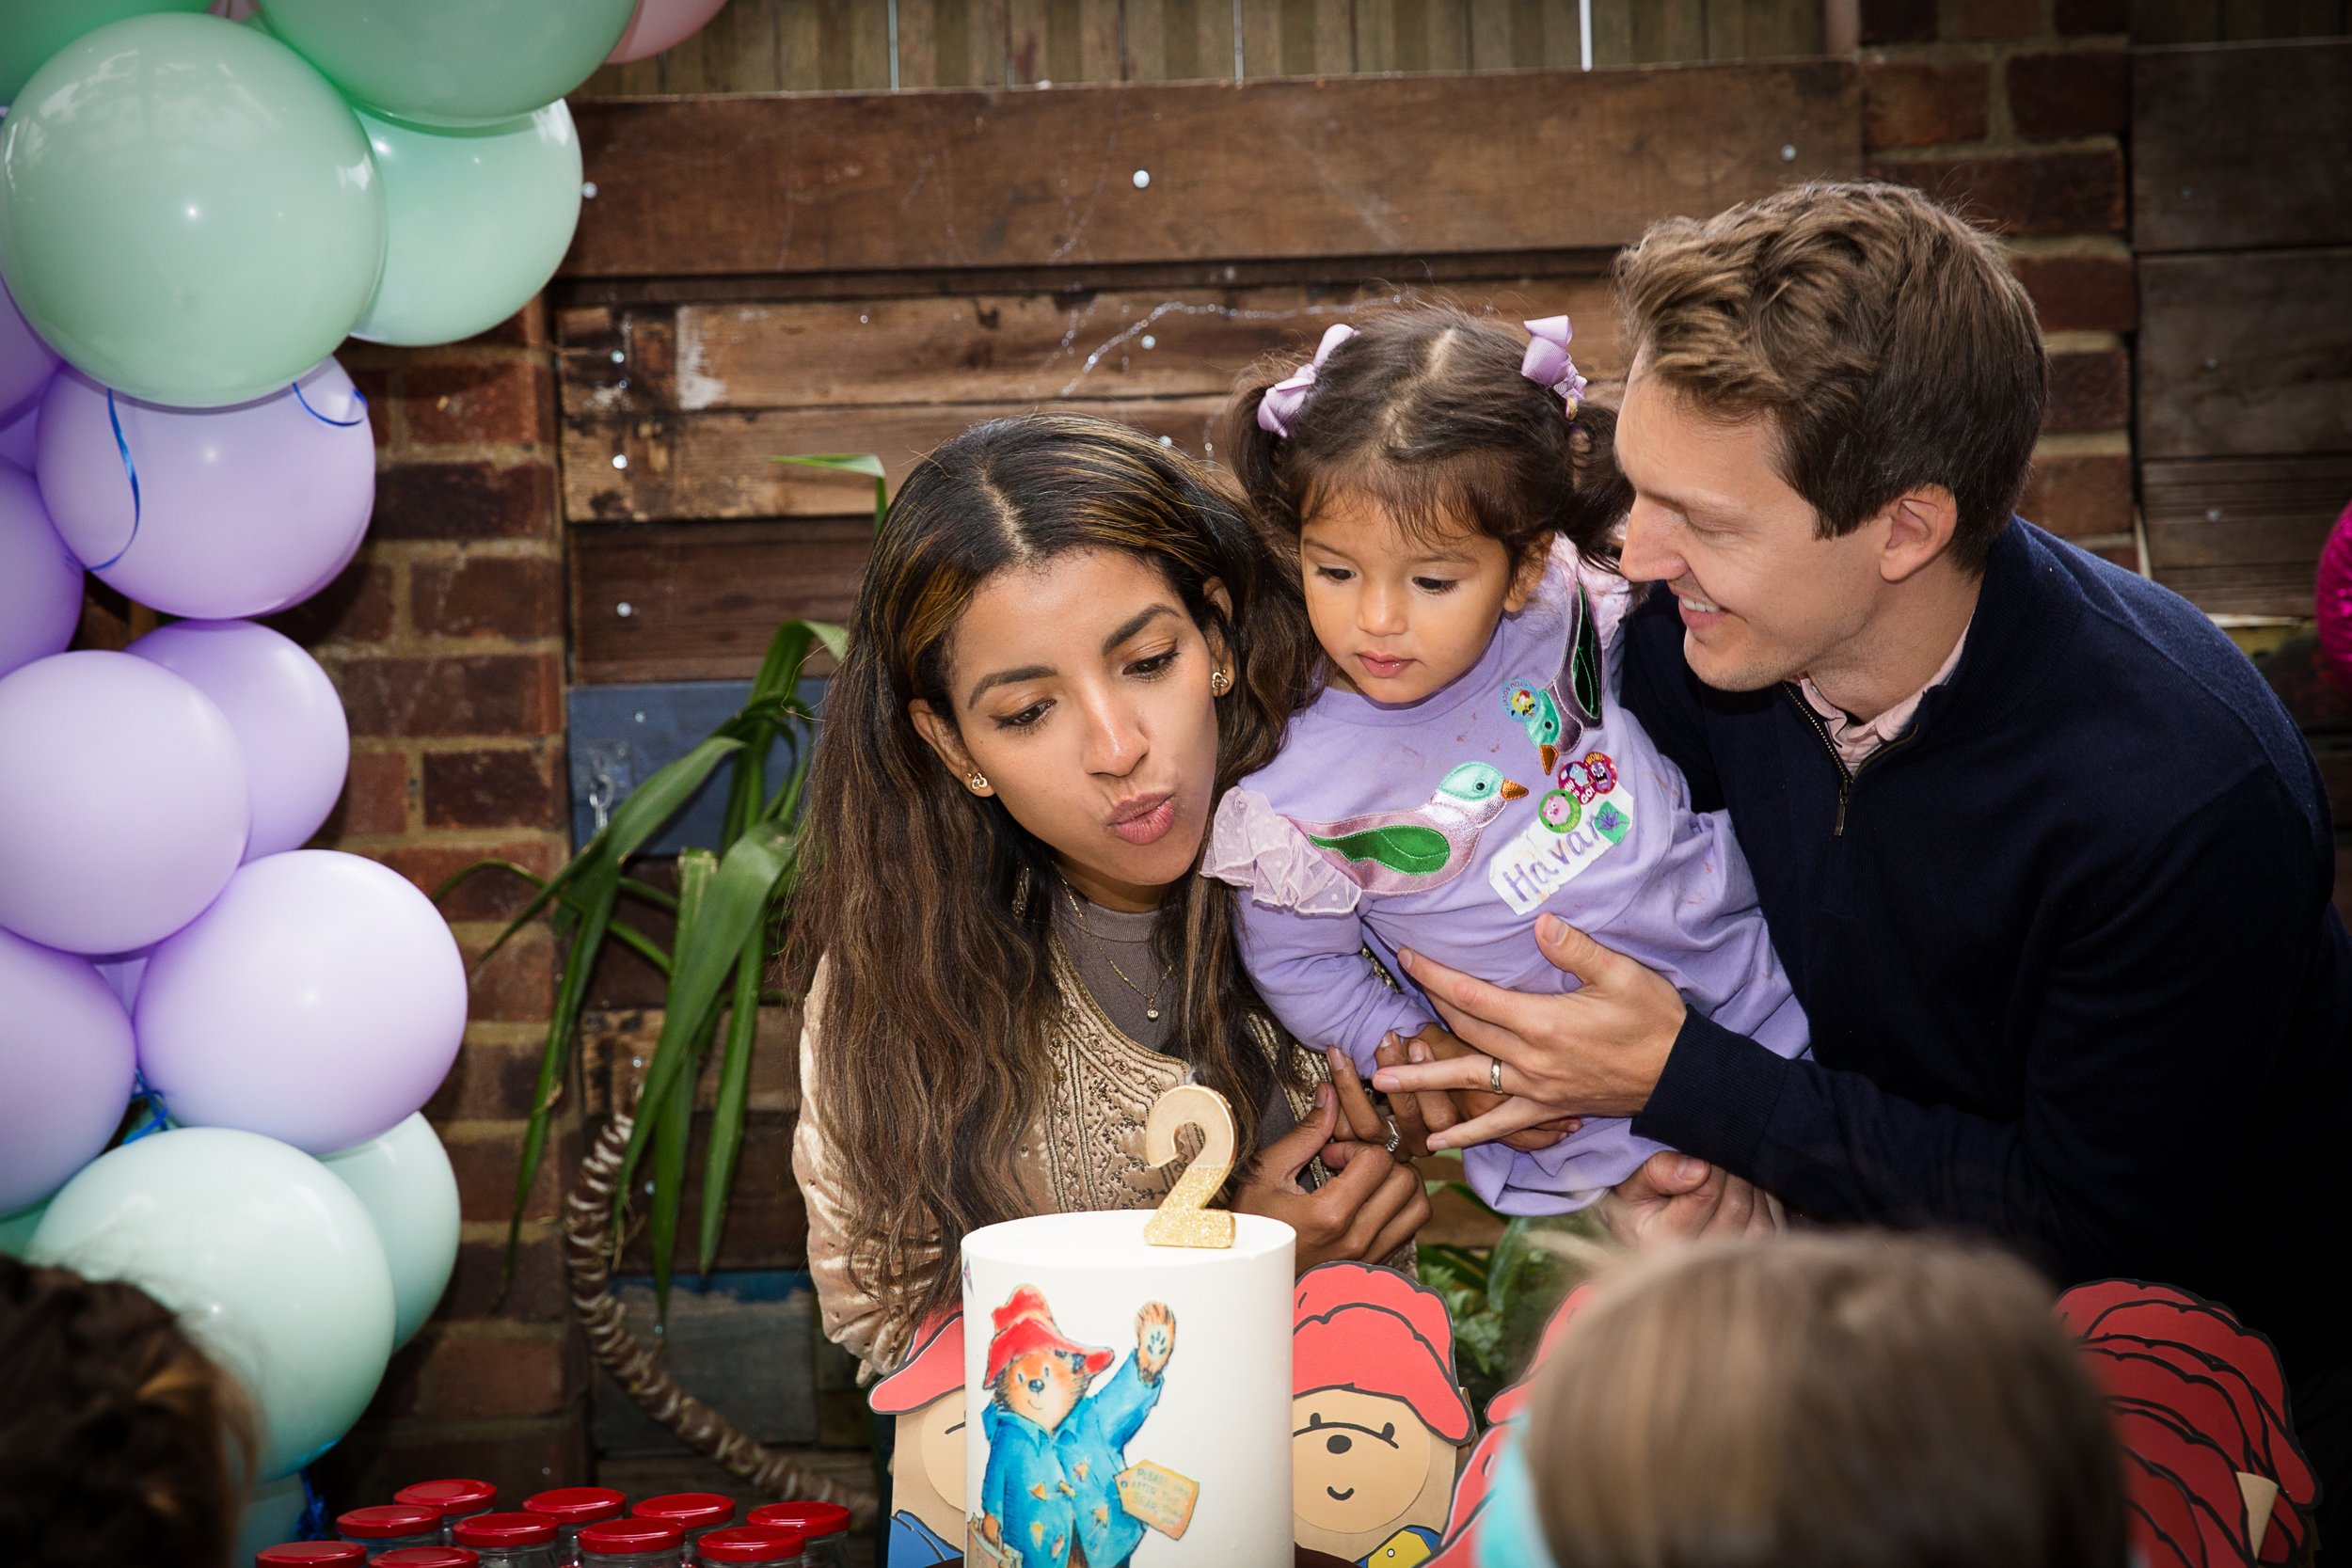  Natasha covers children parties throughout Central London including Regents Park, Hyde Park, Fulham, Chiswick, Richmond, Primrose Hill, Kensington and Chelsea, East Sheen, Kew, Notting Hill Gate, Mayfair and across London. 